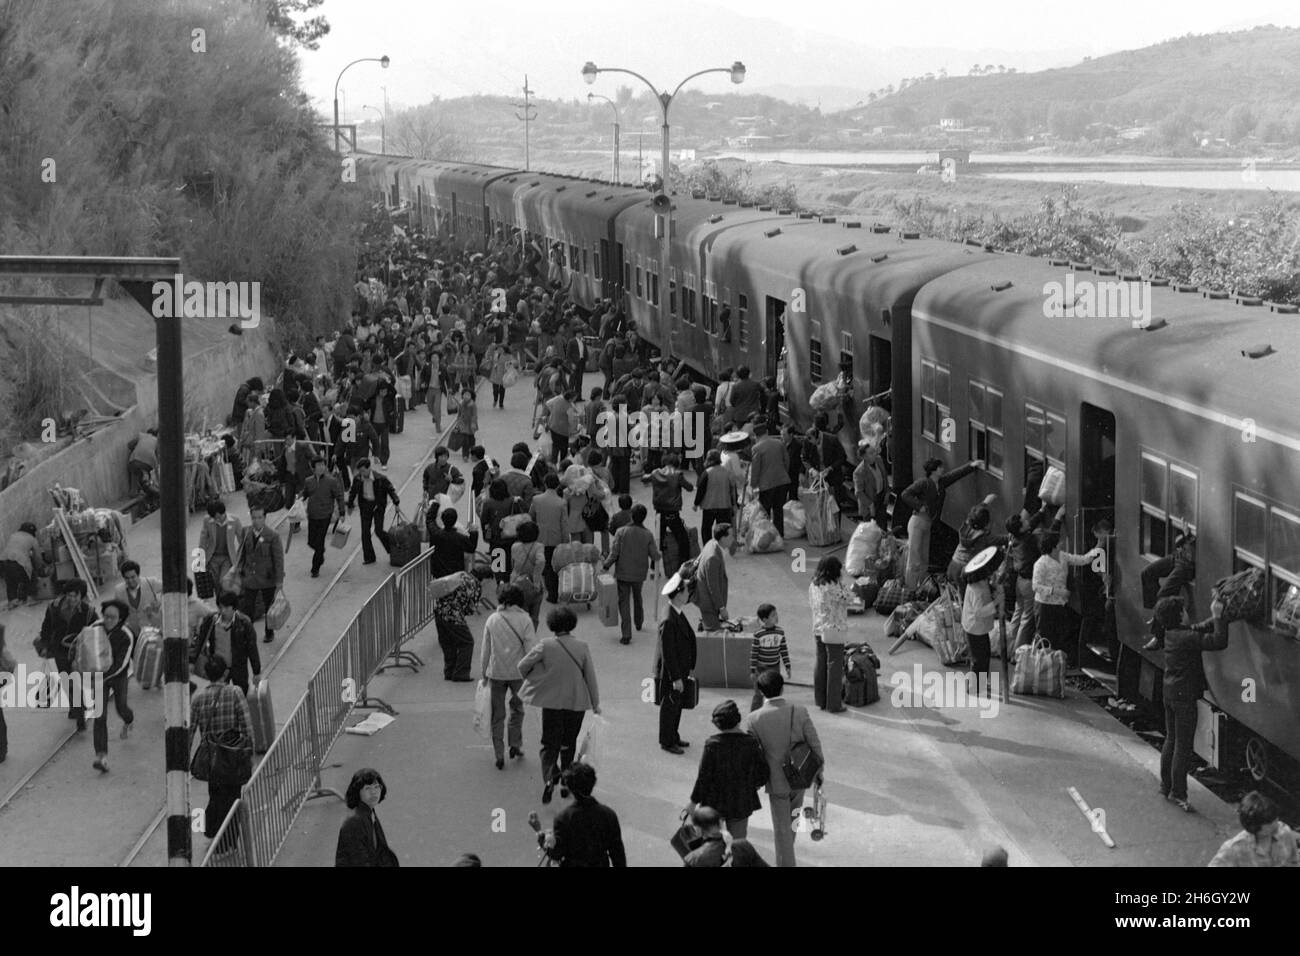 Lo Wu Railway Station, Hong Kong. View from Station Roof - looking south - of passengers getting off a train, heading back to Mainland China at Lunar New Year, 1981. Many are carrying presents for relatives, using bamboo yokes to balance their parcels. The diesel trains were phased out when the Kowloon-Canton Railway (HK section) was electrified in the early 1980s Stock Photo